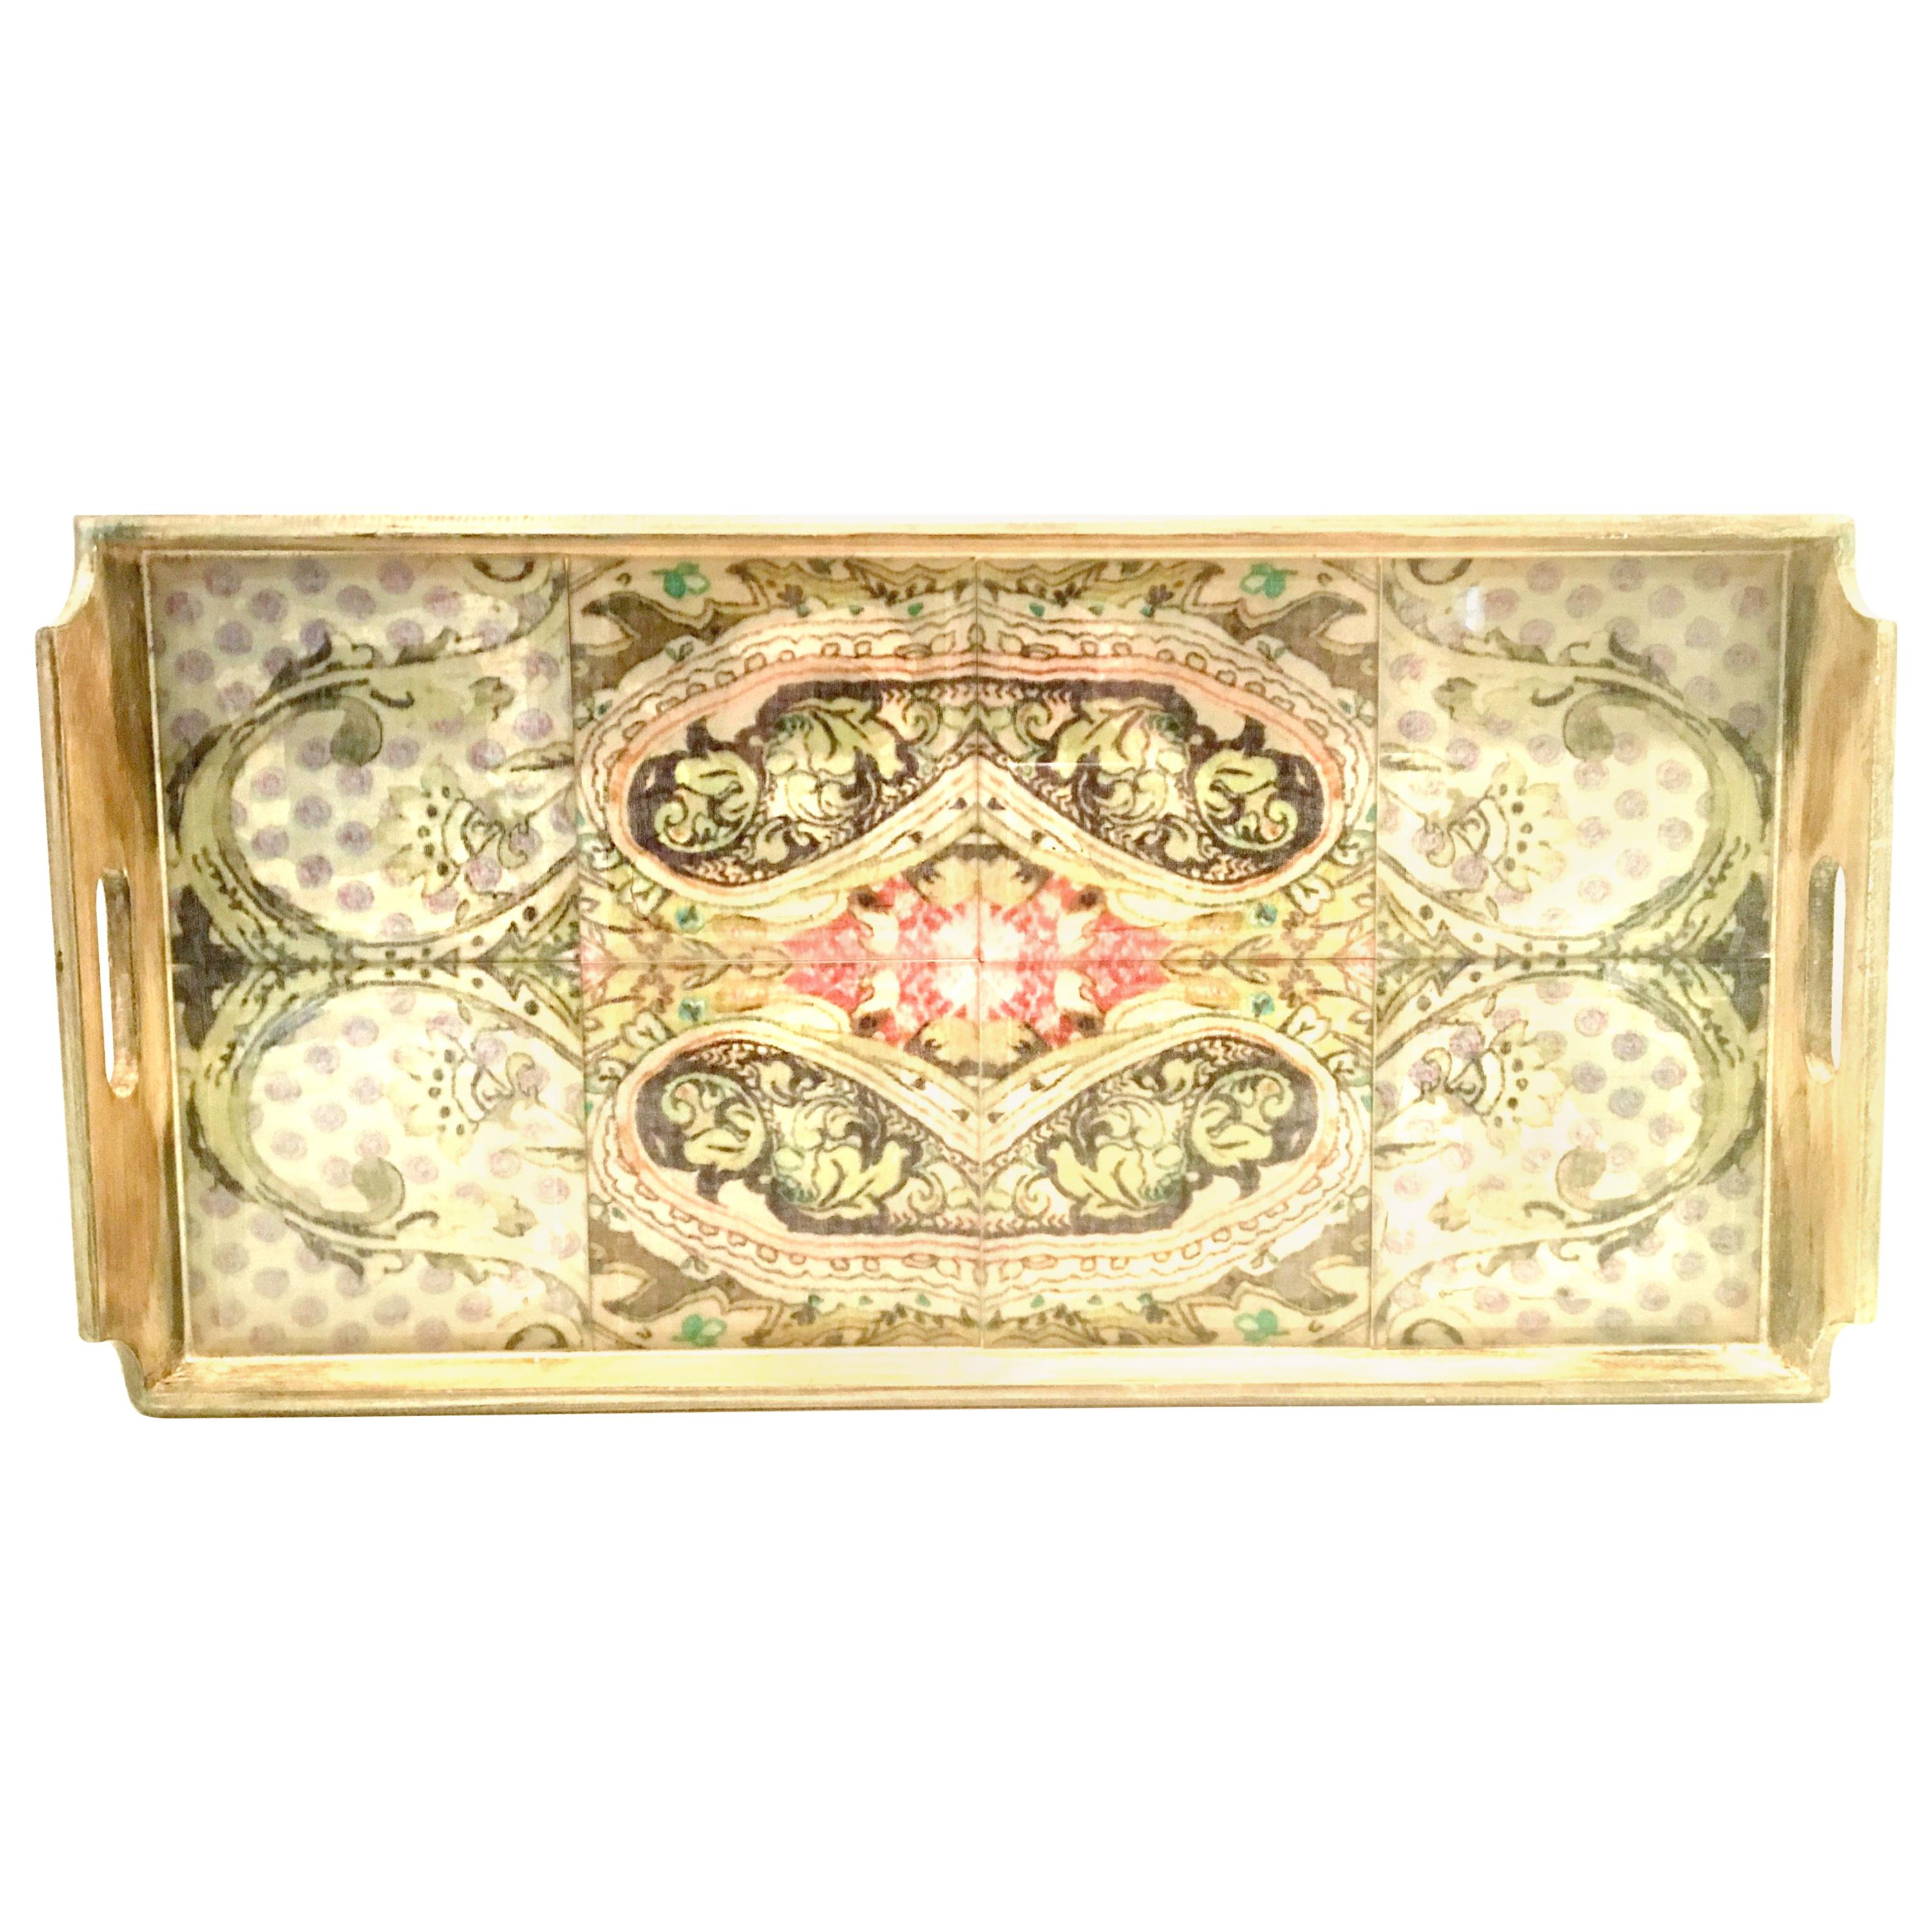 21st Century Large Wood Printed Belgium Linen and Glass Cutout Handle Tray